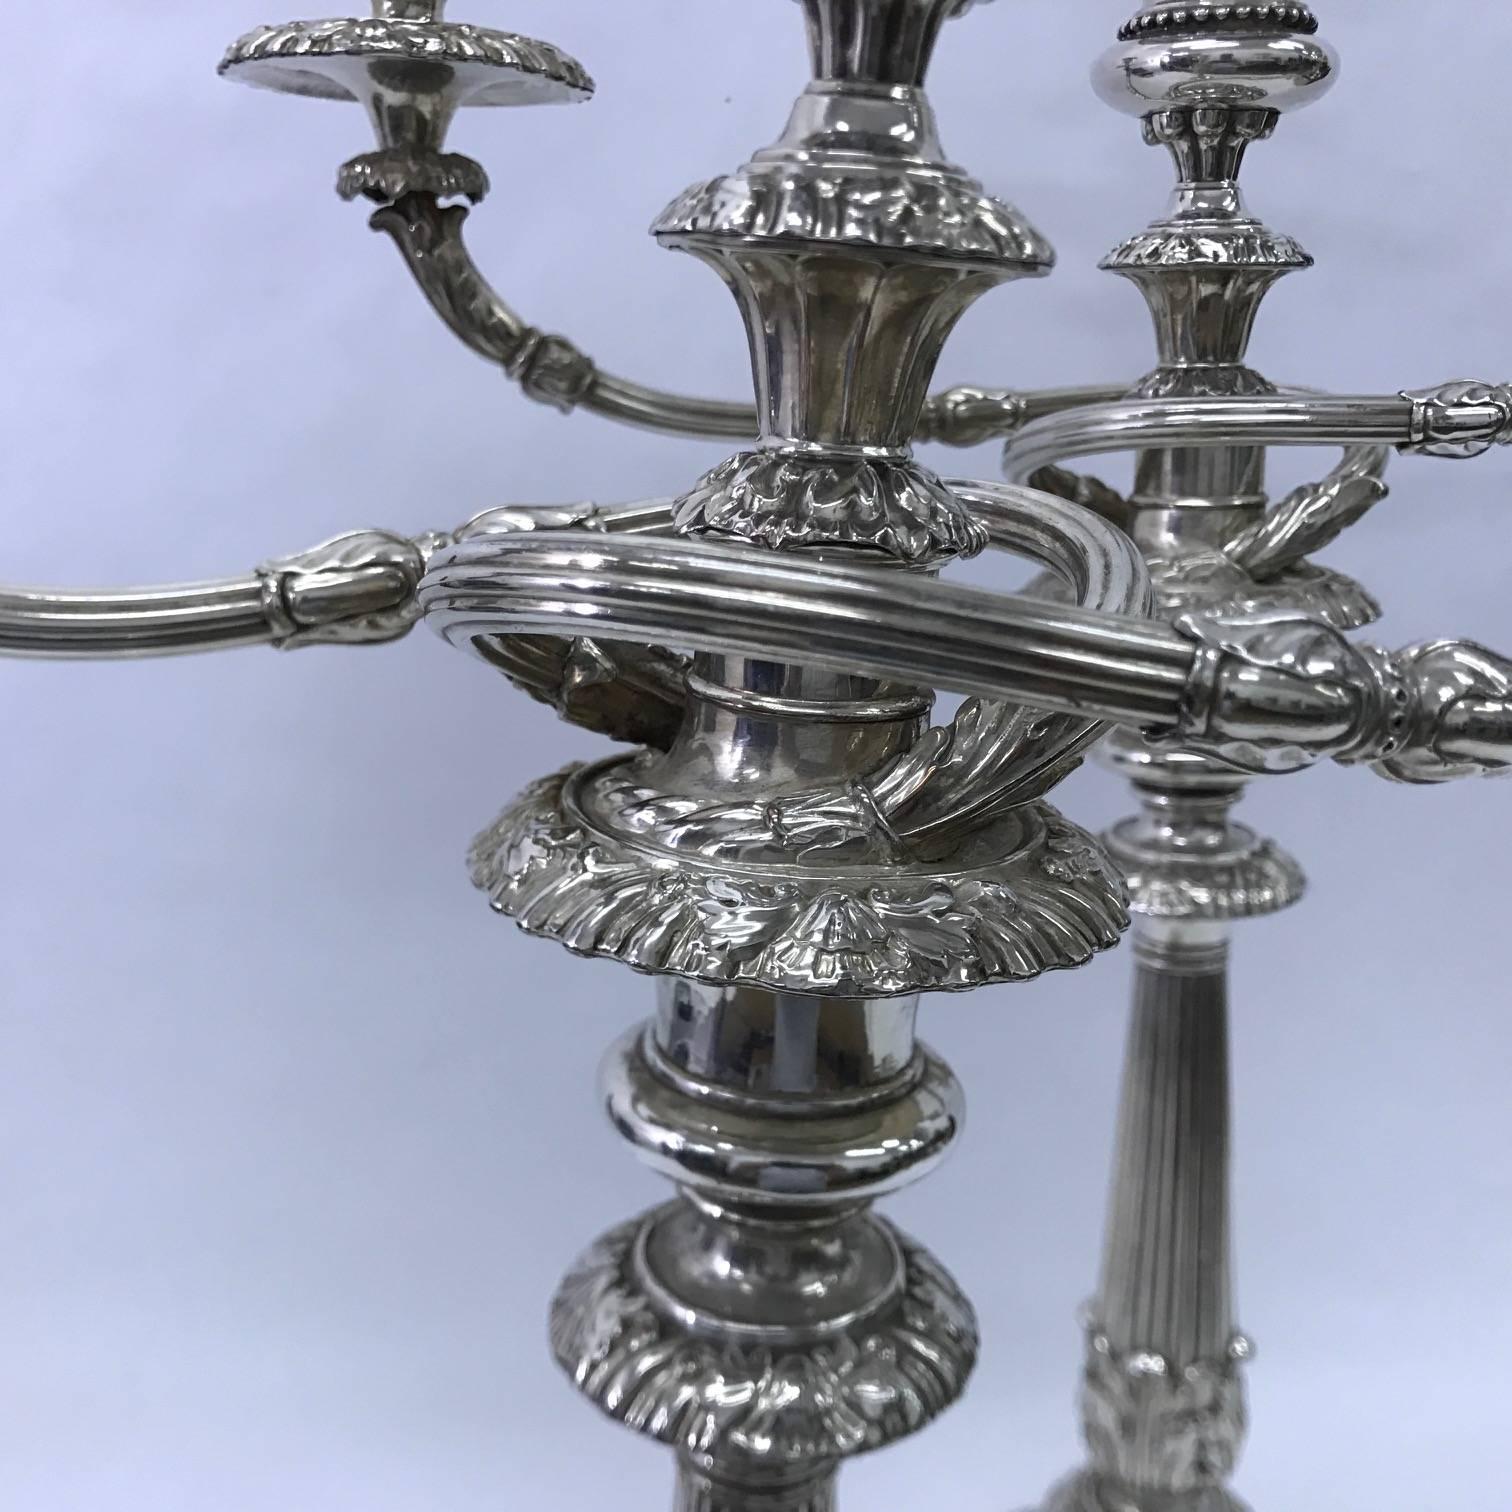 Three's arms candelabra made by Matthew Boulton in 1830-1840. In old sheffield plate, good conditions, very big size.